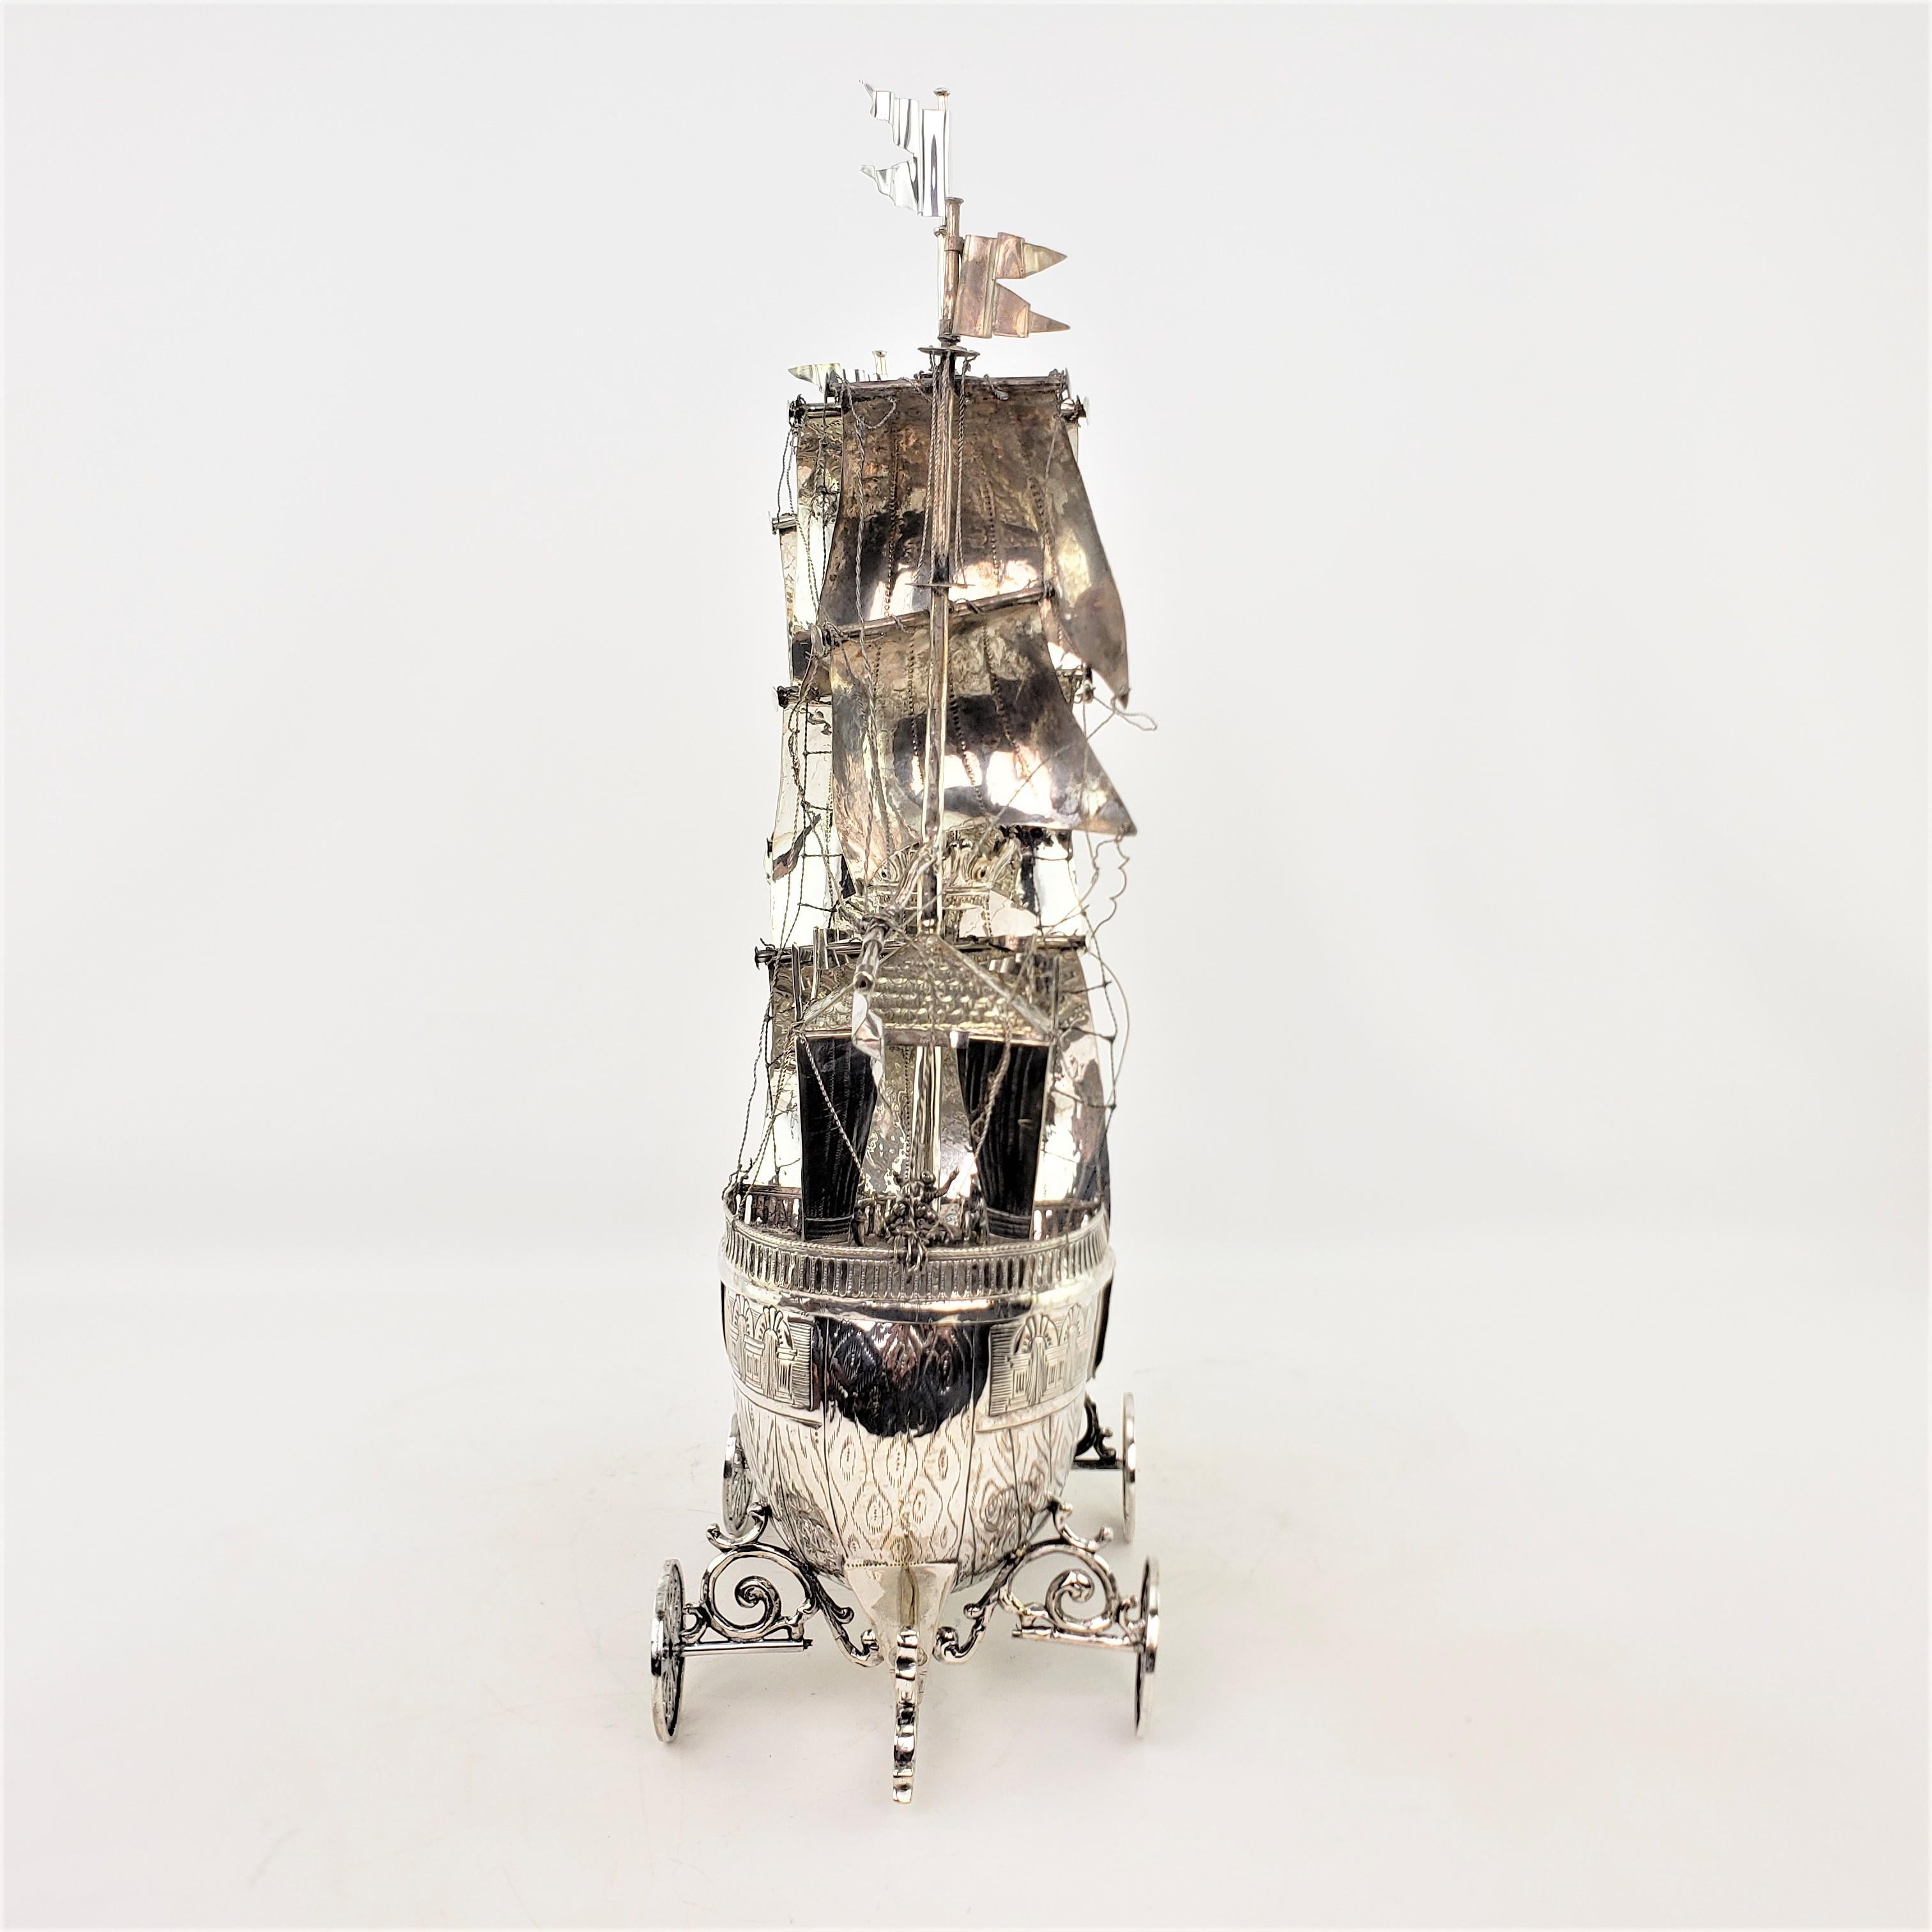 Large Antique Silver Plated Nef or 3 Mast Sailing Ship Sculpture or Centerpiece For Sale 2